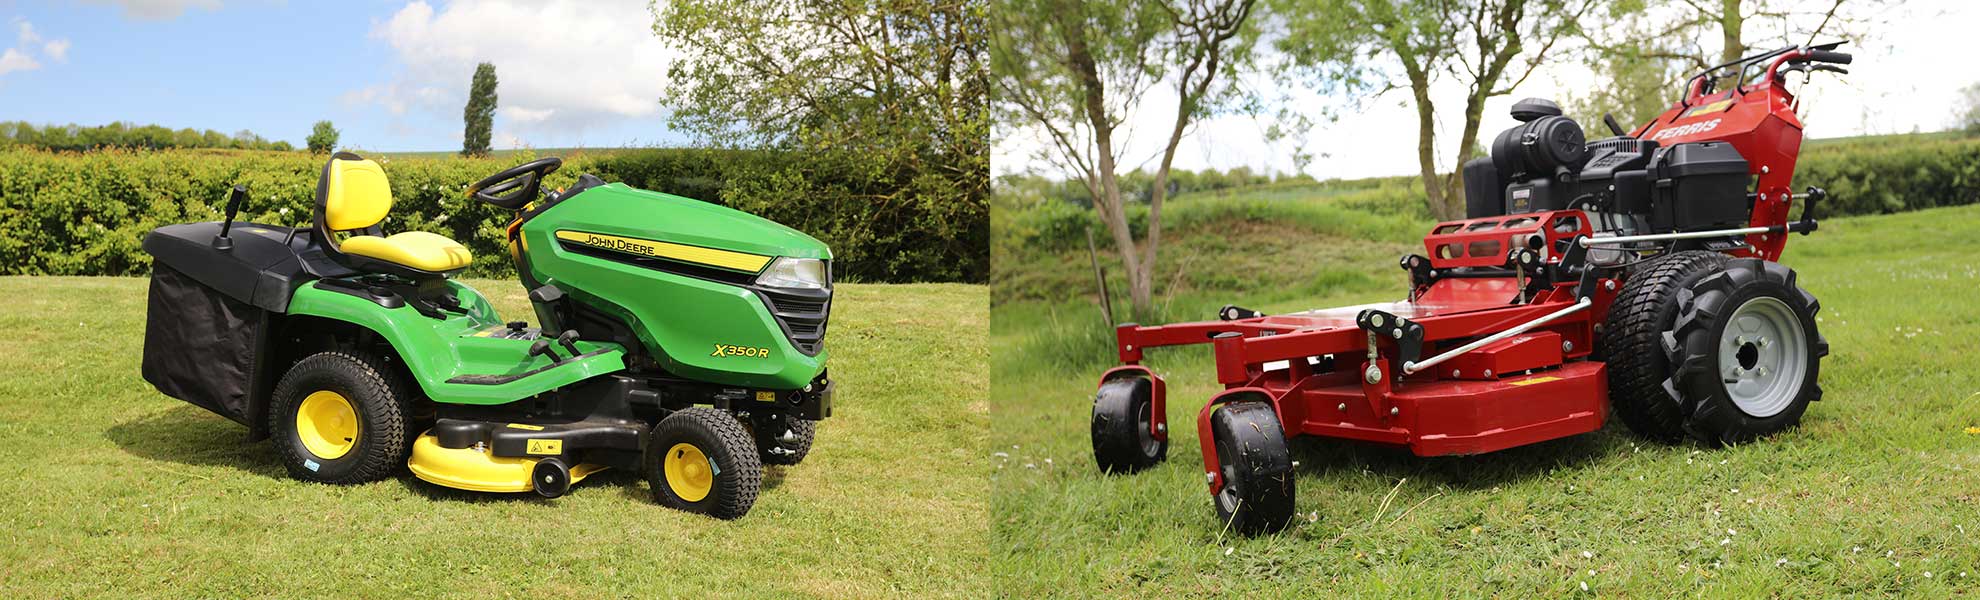 2 garden machines, showing range of mowers available from oxston Groundcare